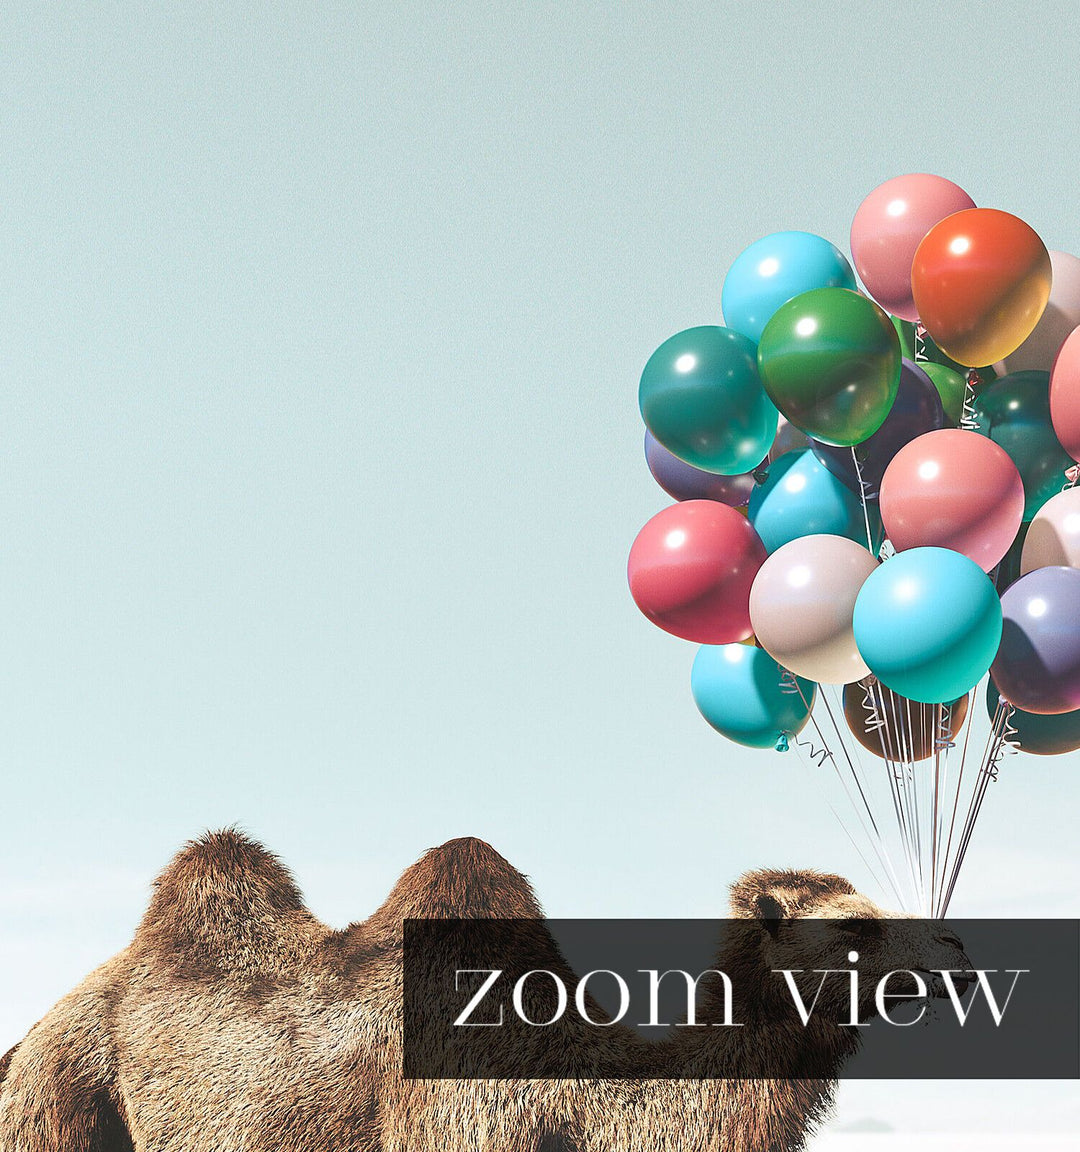 Camel with Balloons